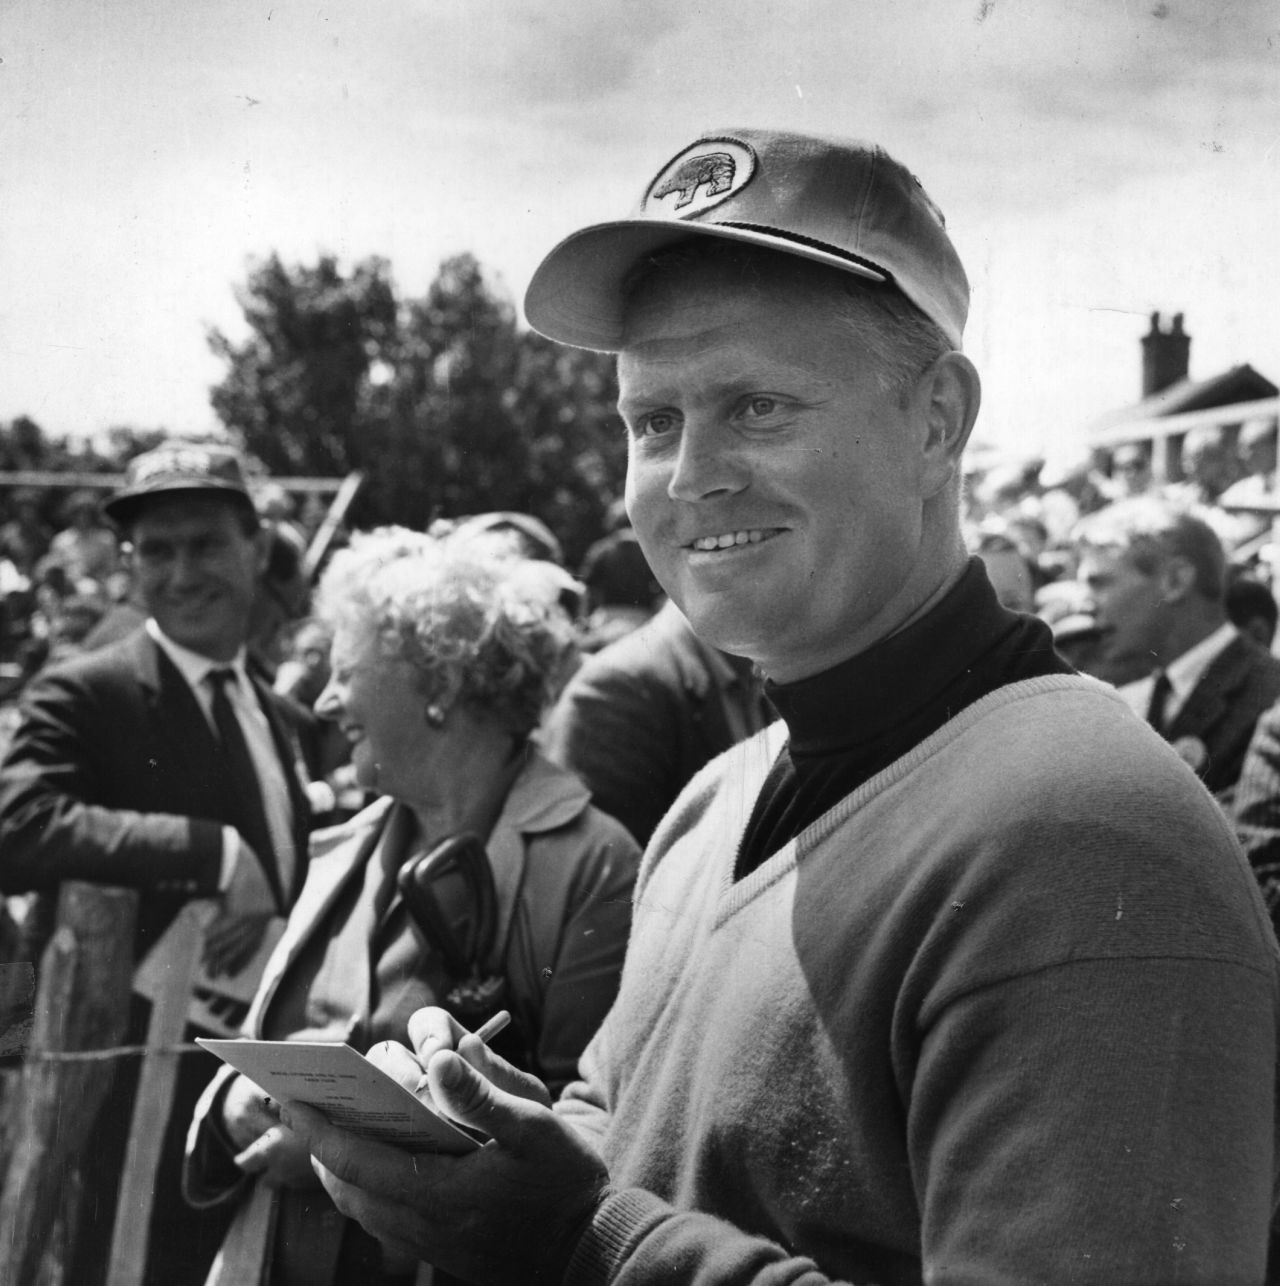 Nicklaus was born in Ohio in January 1940 and took up golf at the age of 10. He won the US Amateur title in 1959 and 1961 and finished second behind Arnold Palmer in the 1960 US Open while still an amateur. 